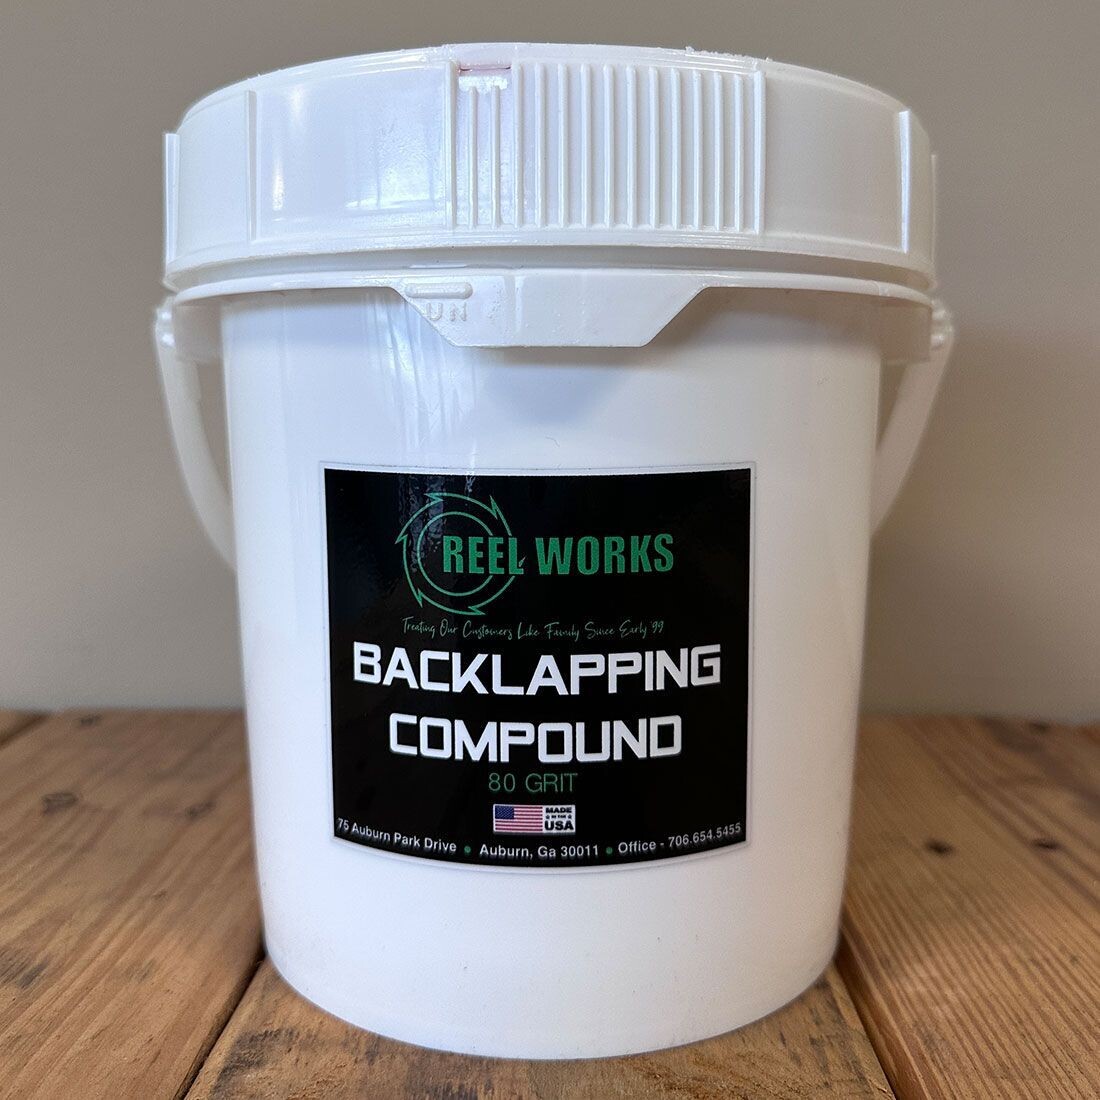 Premium Backlapping Compound